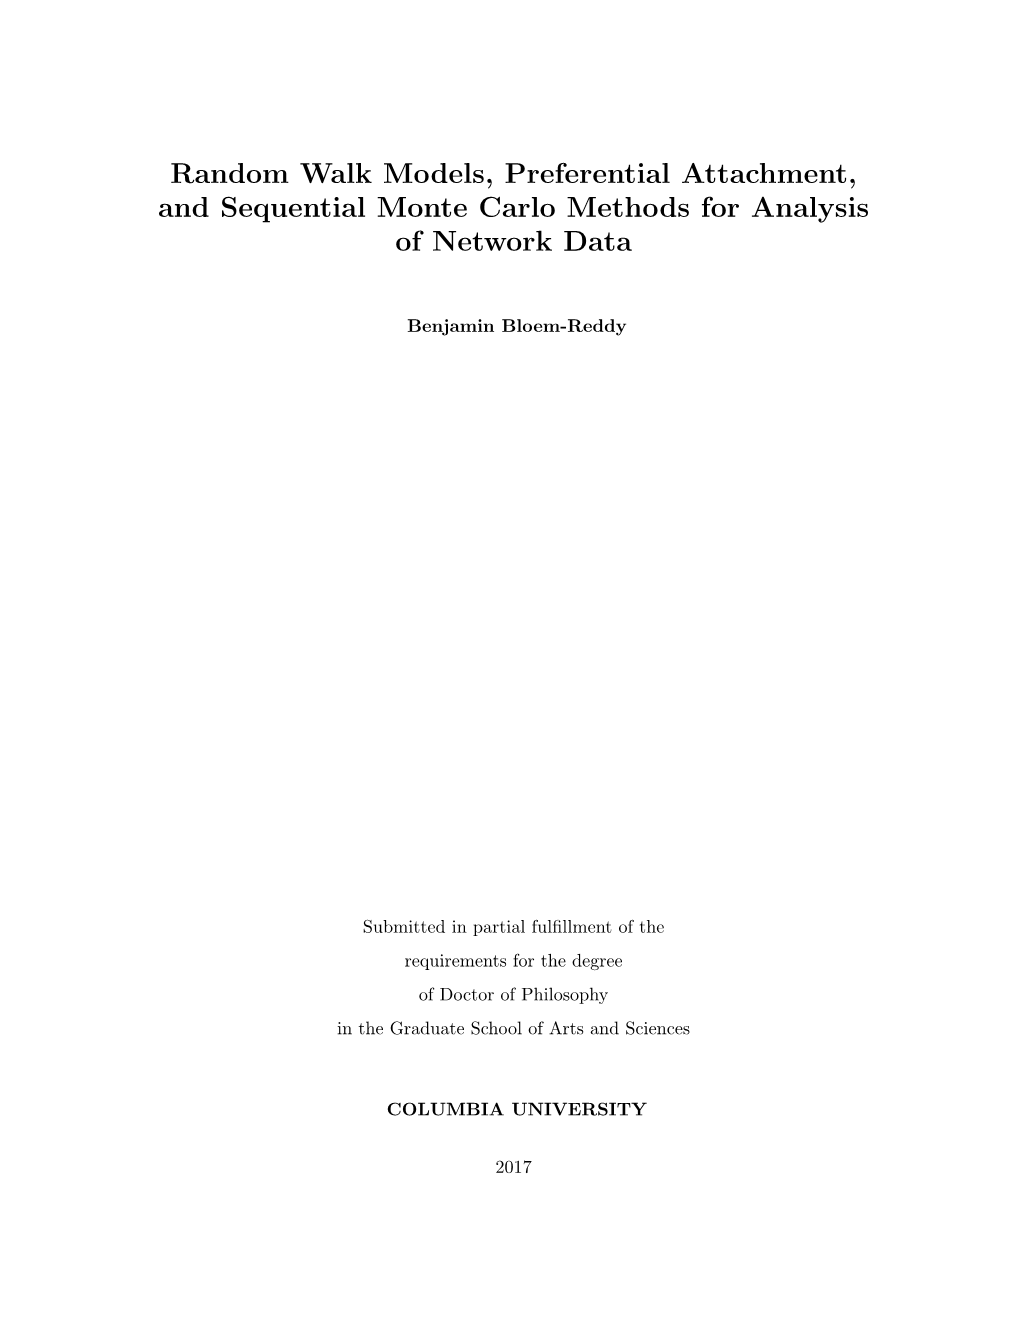 Random Walk Models, Preferential Attachment, and Sequential Monte Carlo Methods for Analysis of Network Data